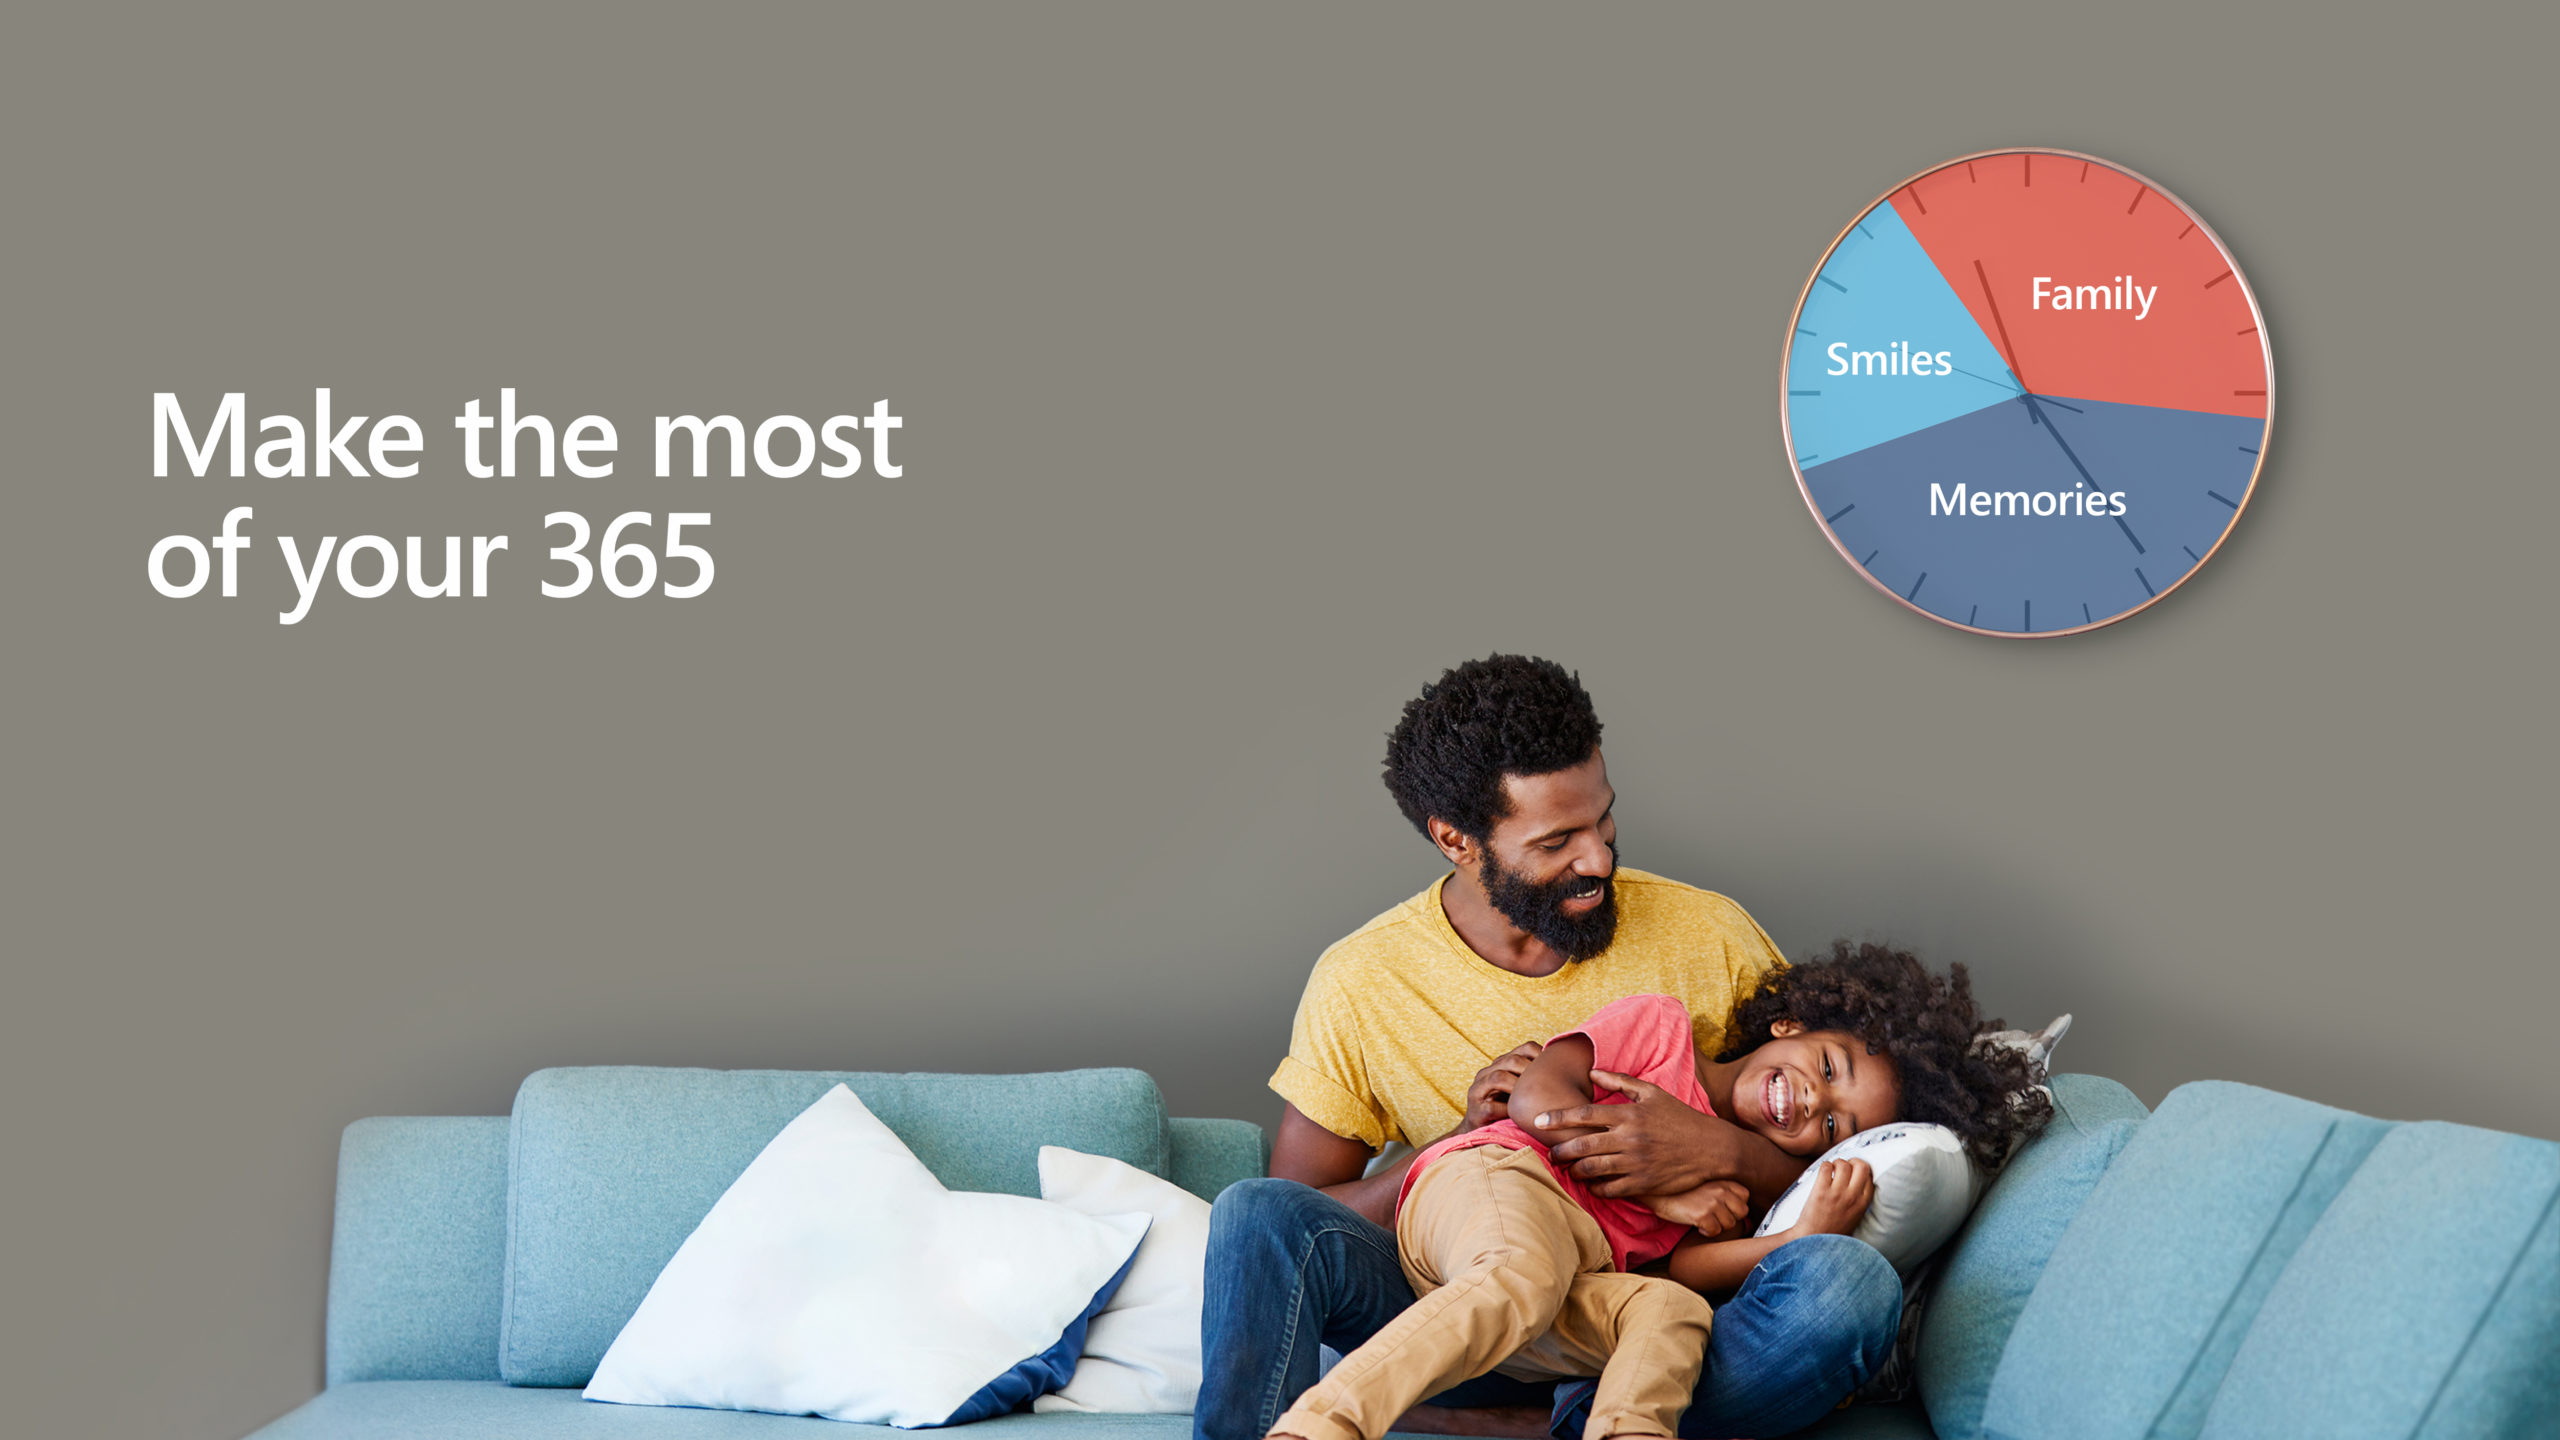 Introducing the new Microsoft 365 Personal and Family subscriptions